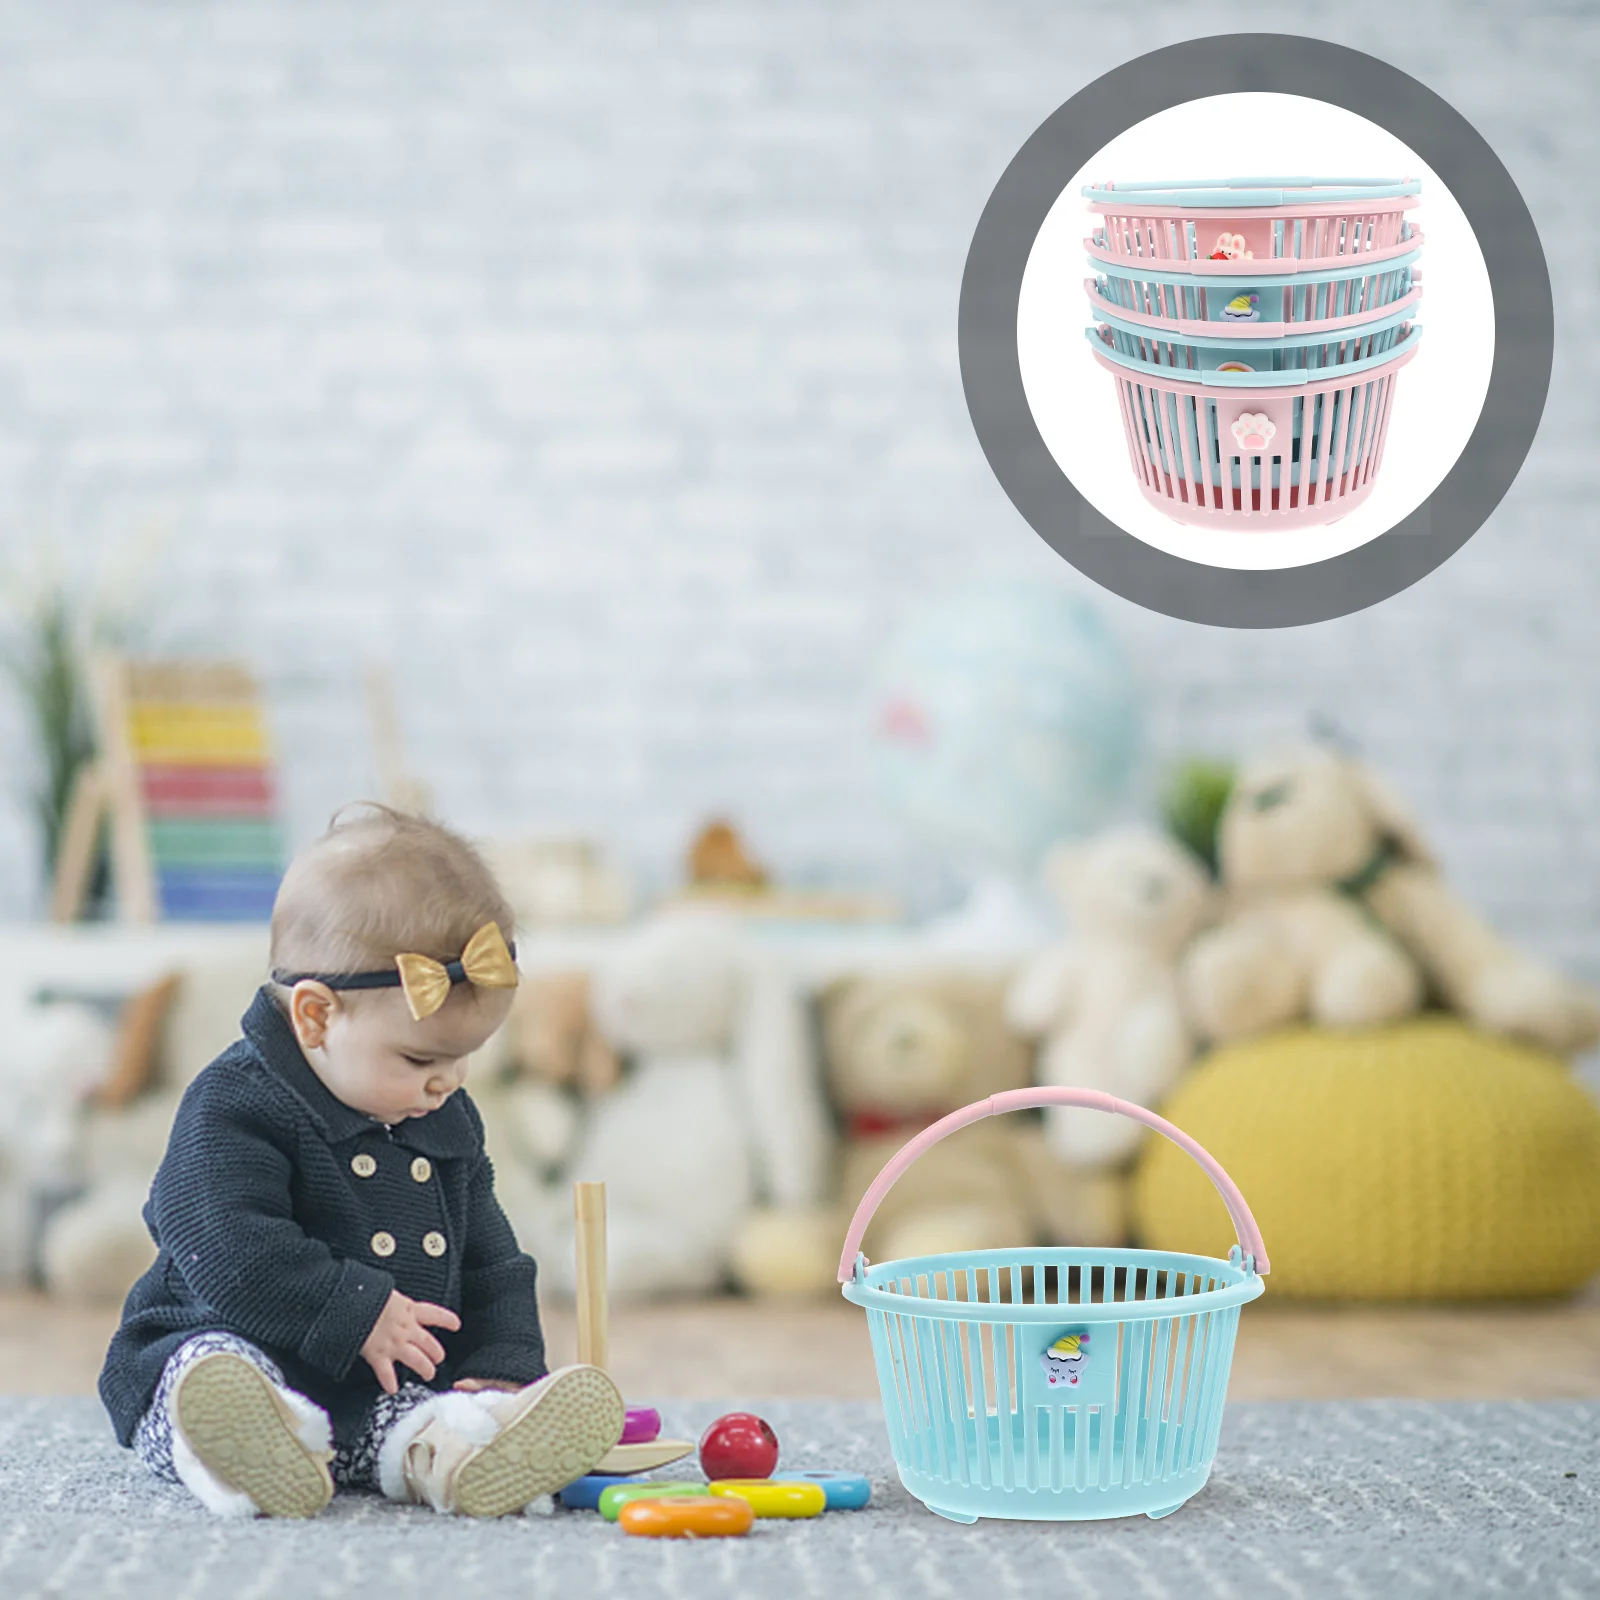 

Basket Storage Baskets Shower Handle Shopping Cute Toy Classroom Bin Mini Handles Kids Play Gift Tote Organizer Party Favors